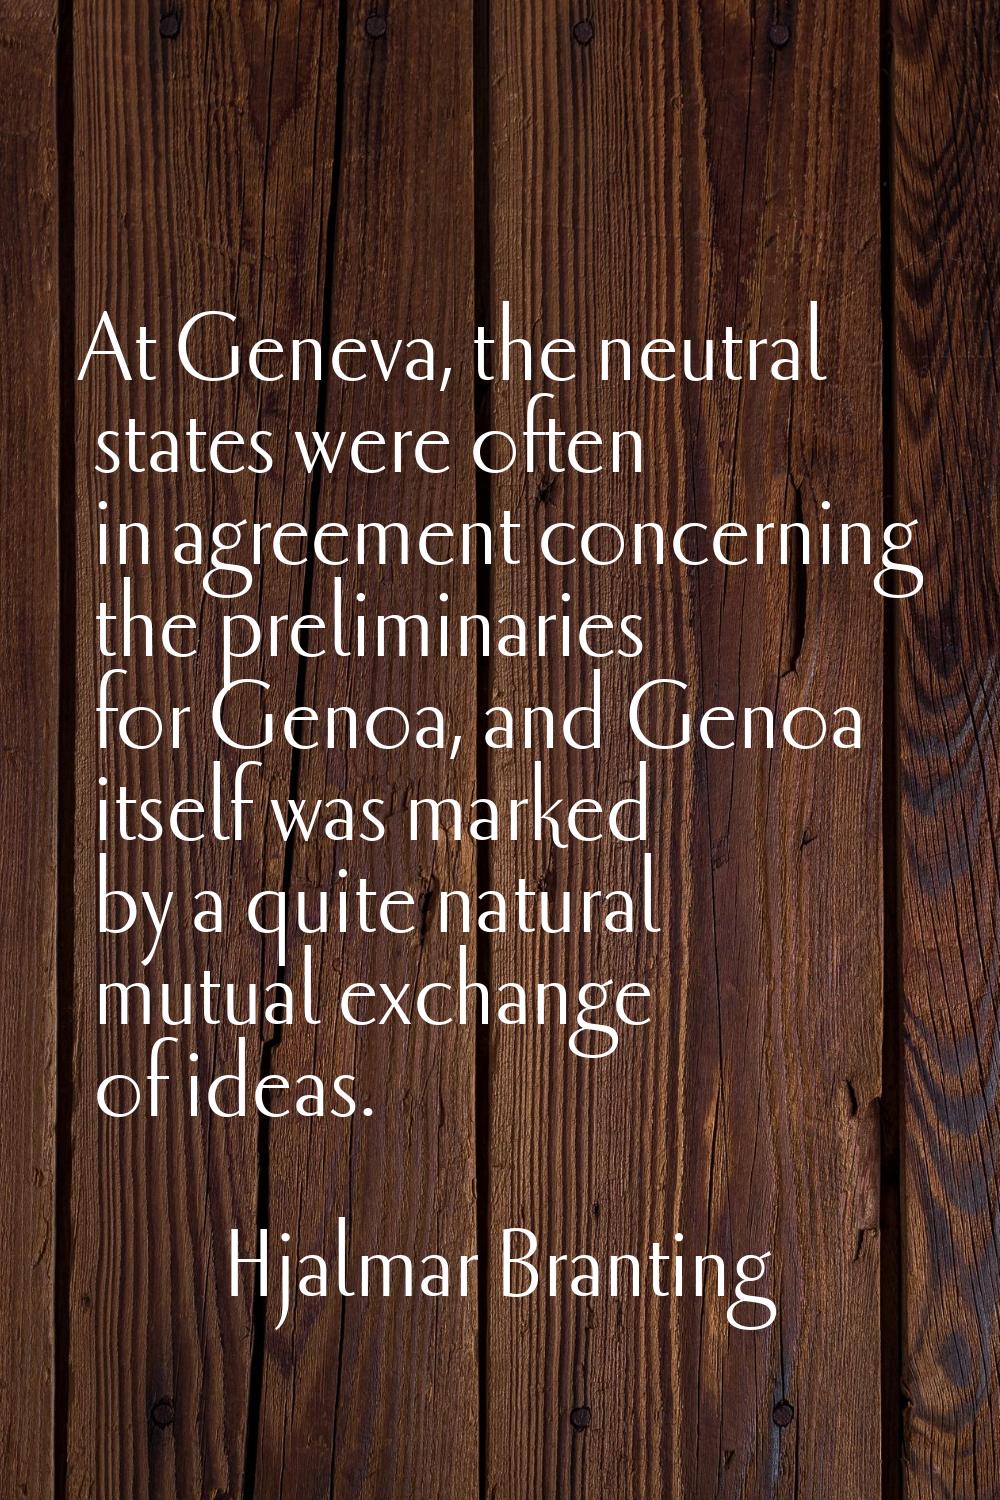 At Geneva, the neutral states were often in agreement concerning the preliminaries for Genoa, and G